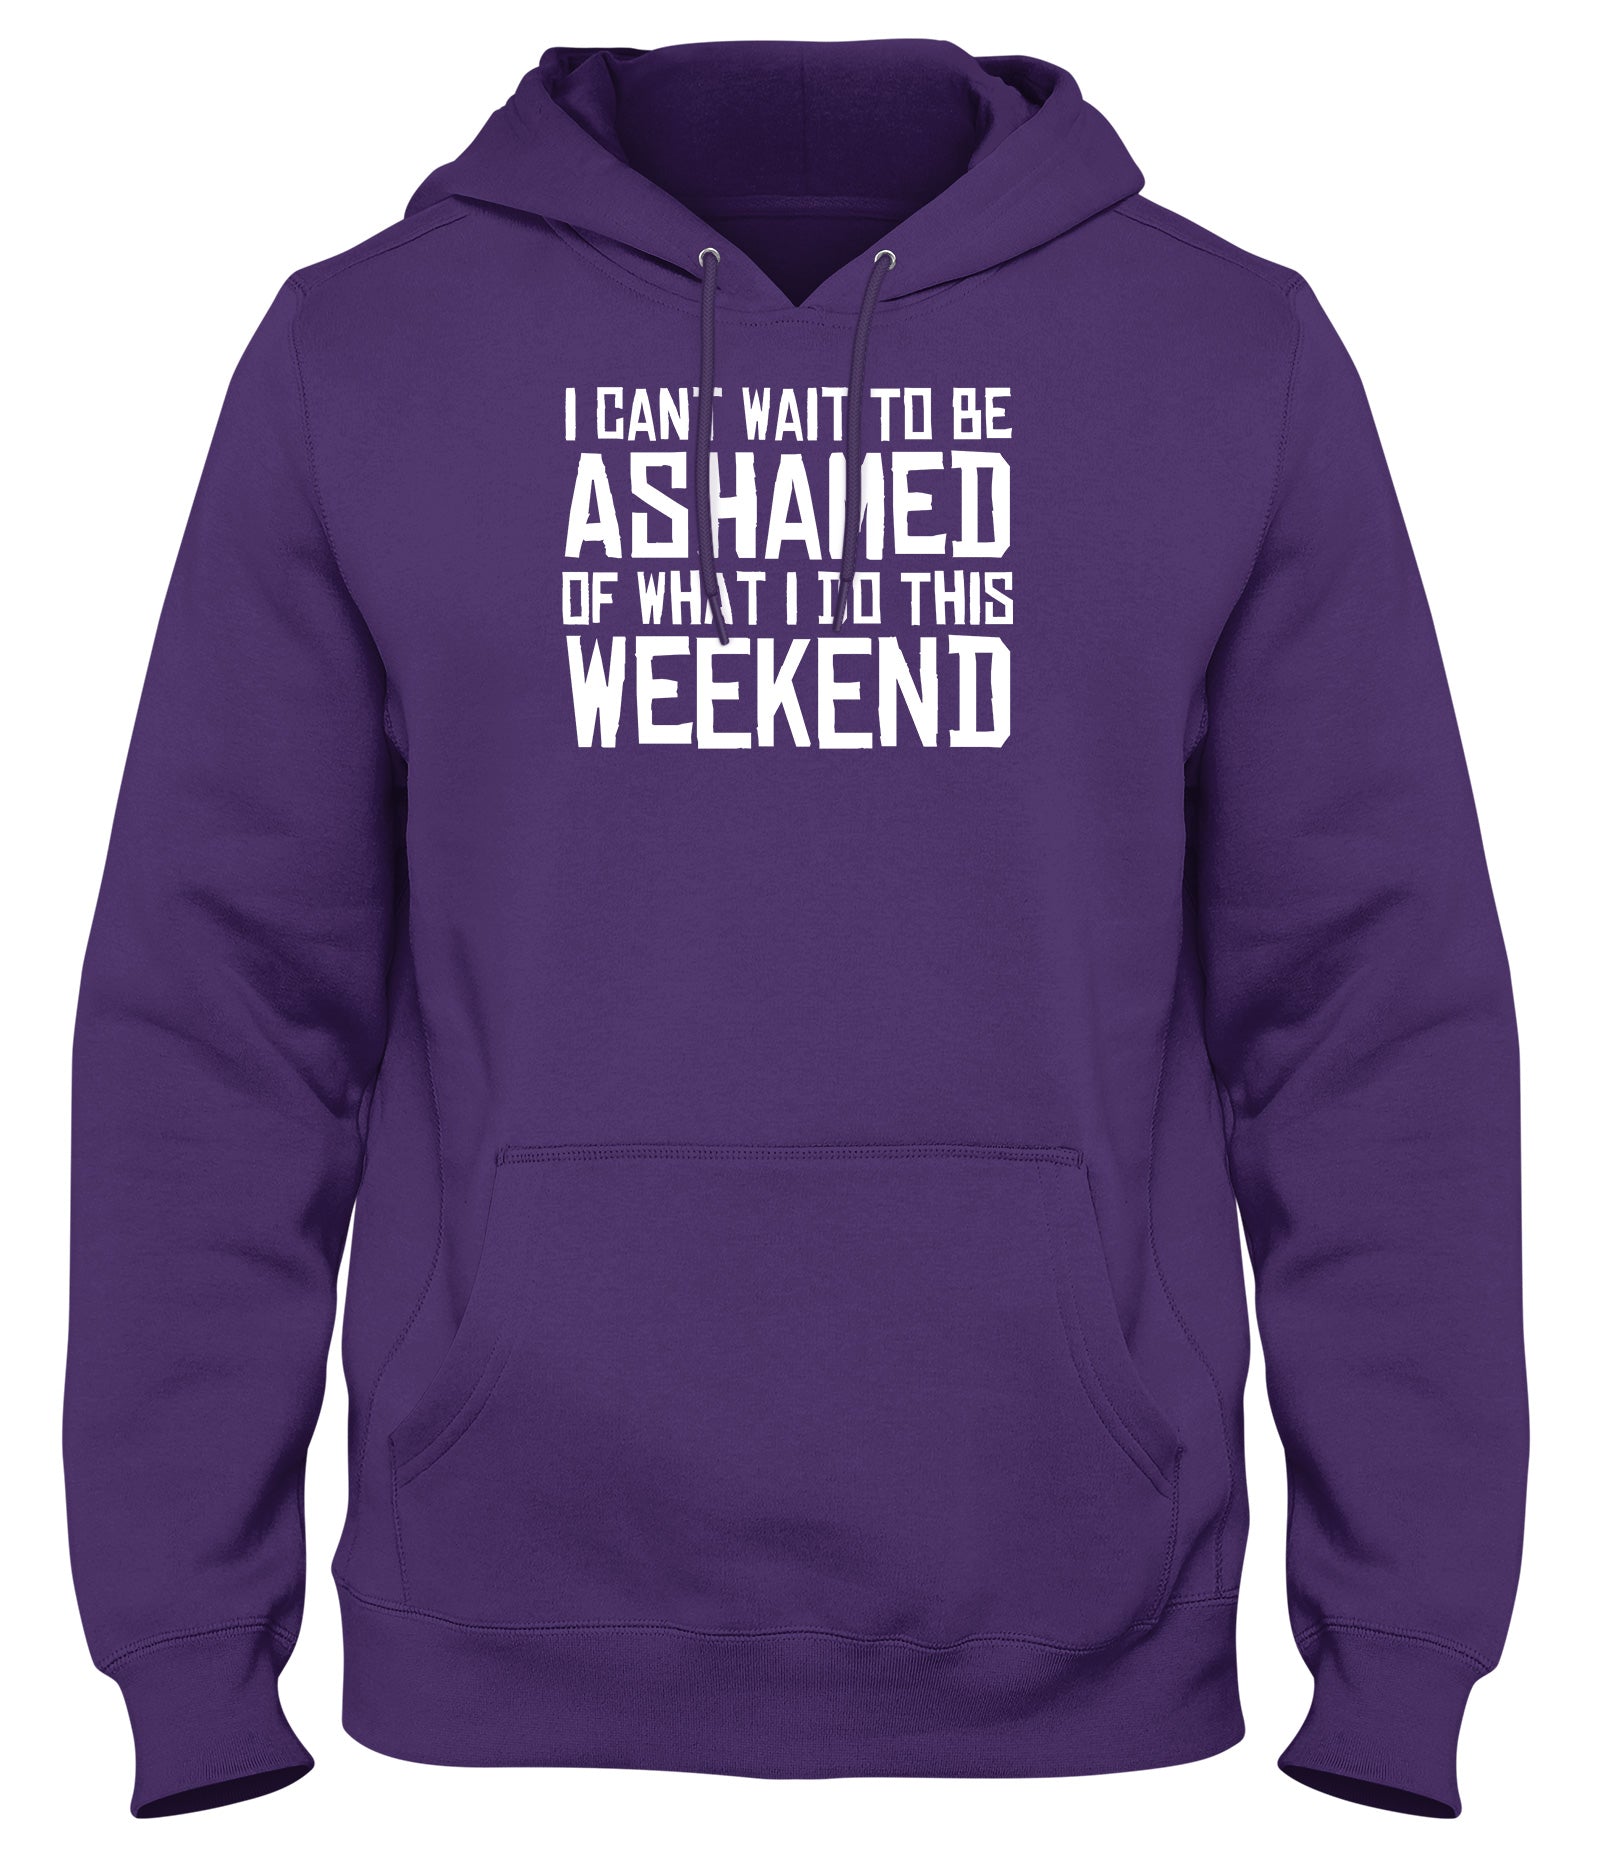 I CAN'T WAIT TO BE ASHAMED OF WHAT I DO THIS WEEKEND WOMENS LADIES MENS UNISEX HOODIE